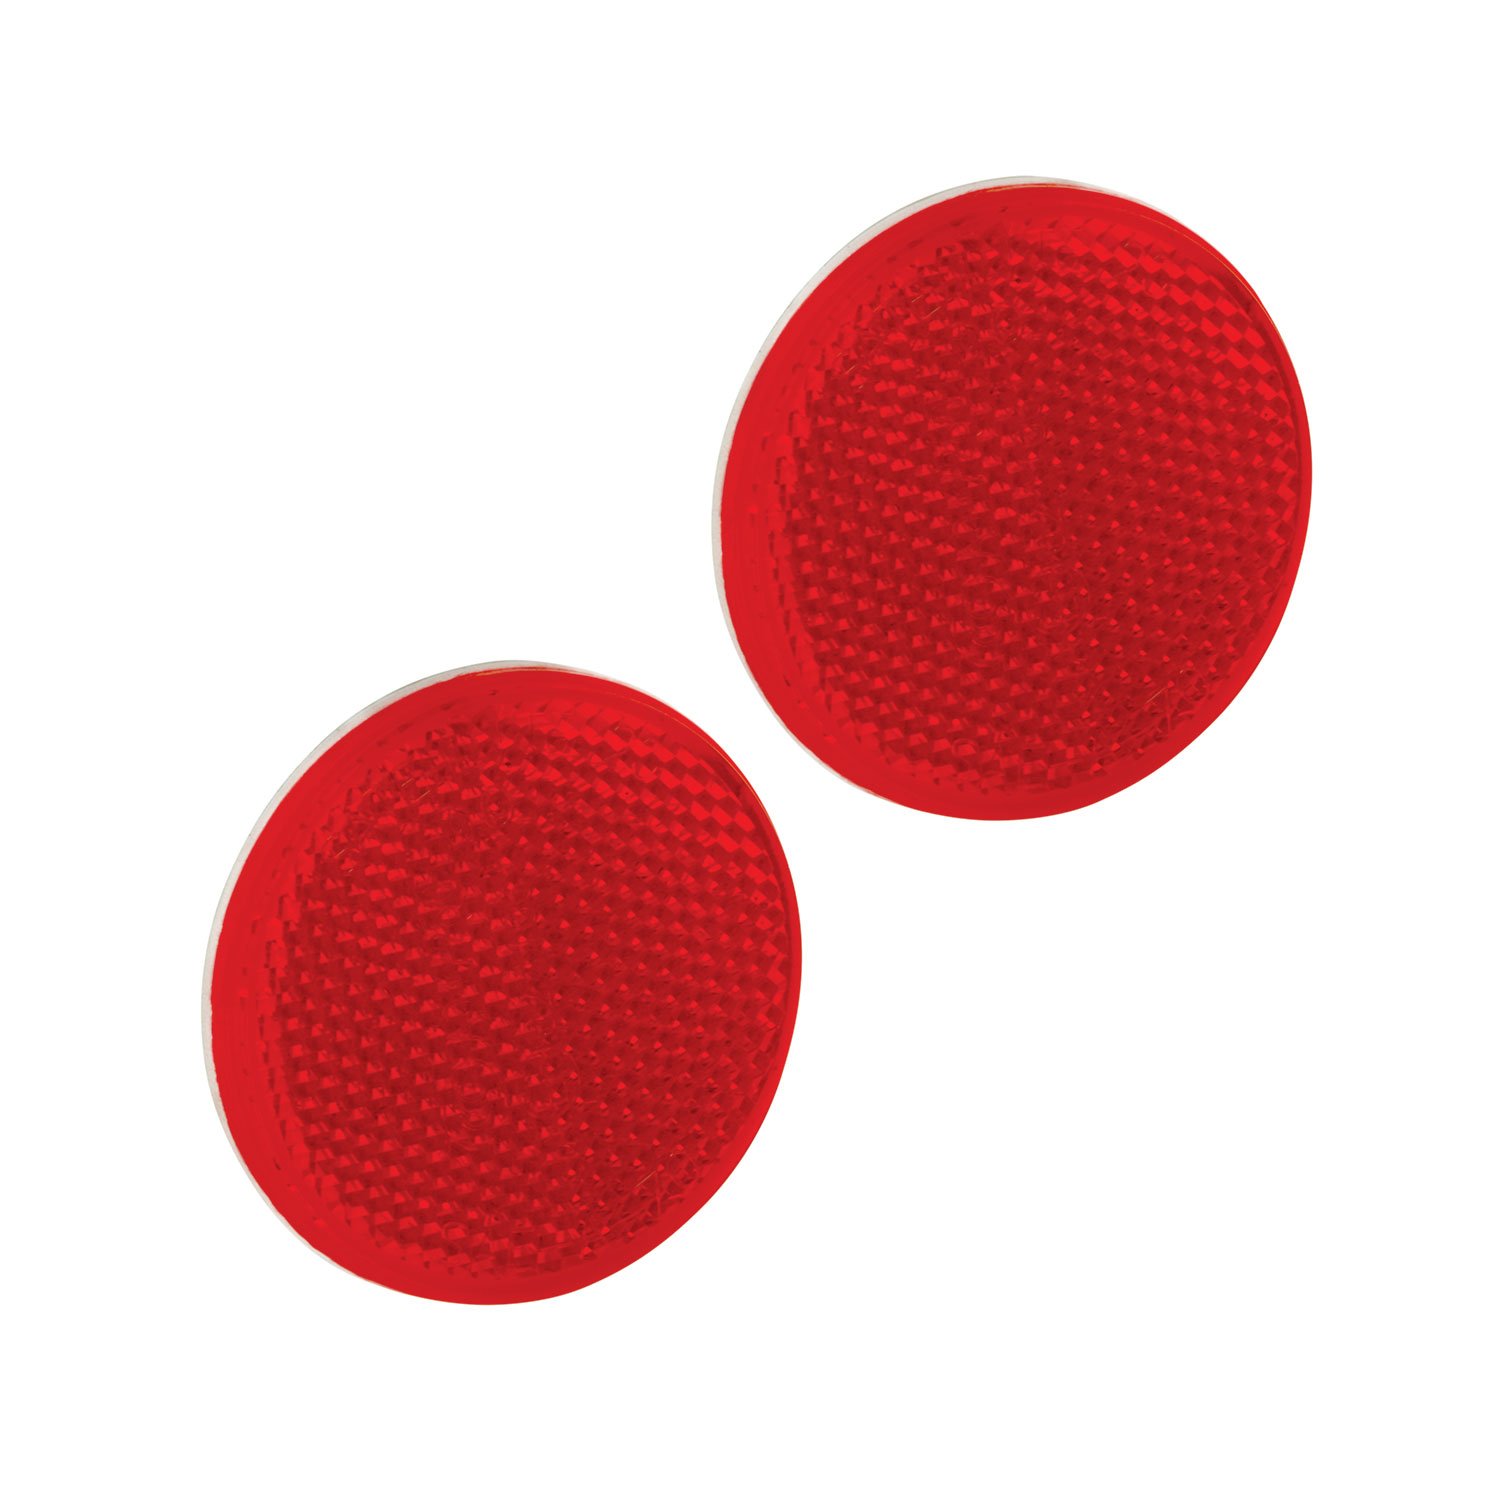 Bargman 71-55-010 Round Red Reflector with Adhesive Back - 2-3/16 Inch